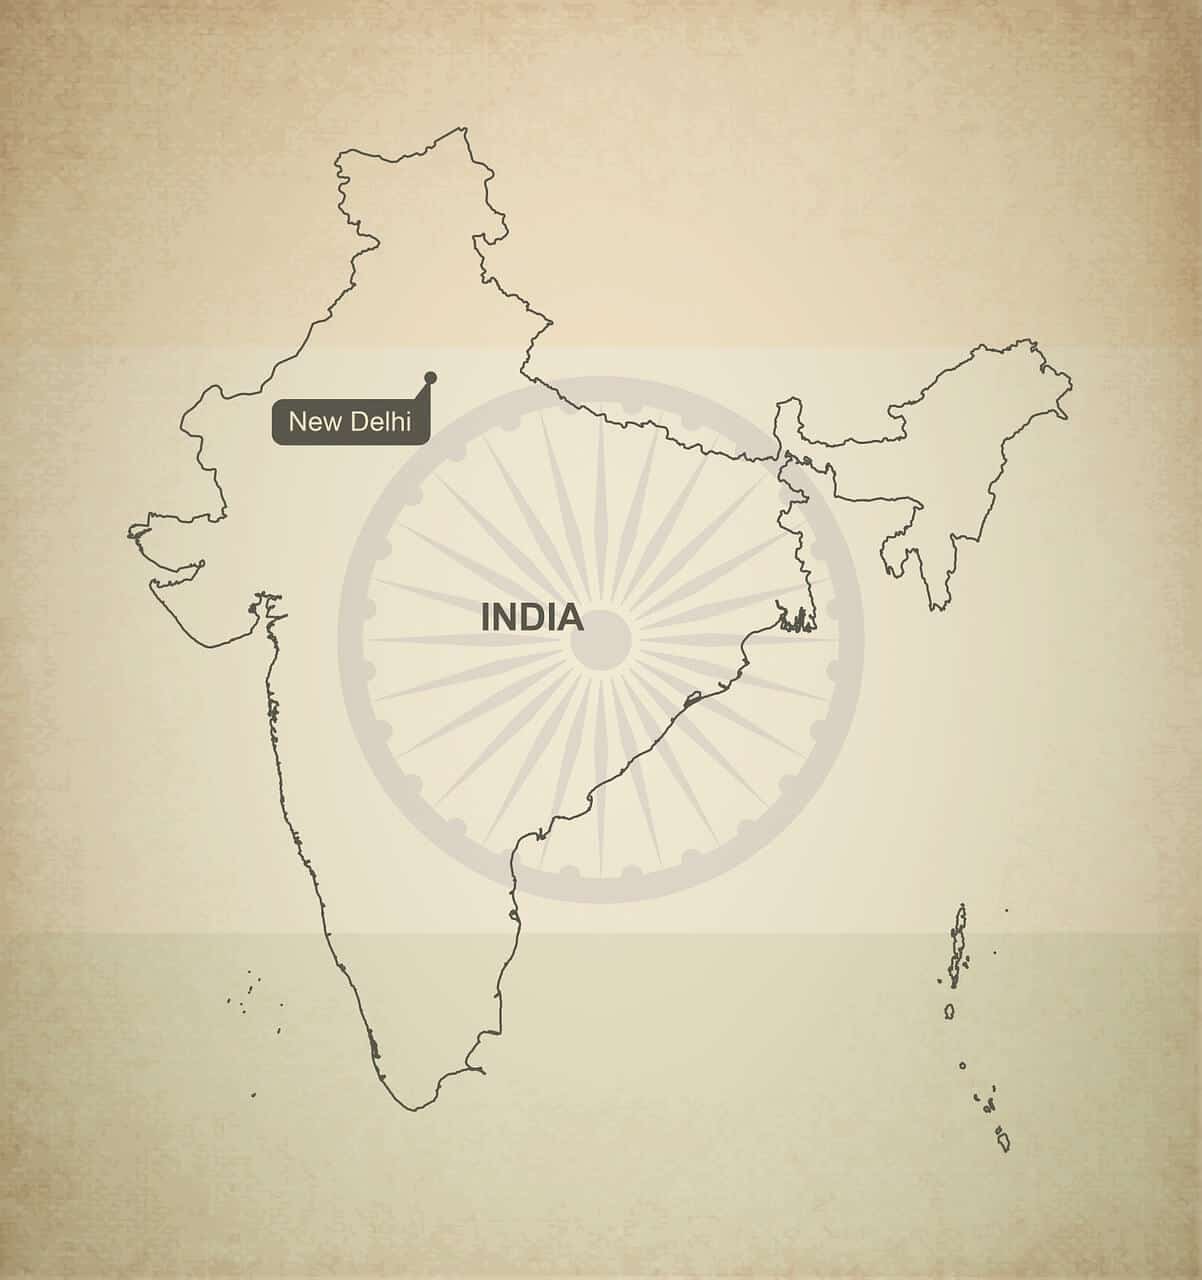 List of Indian States and Union Territories